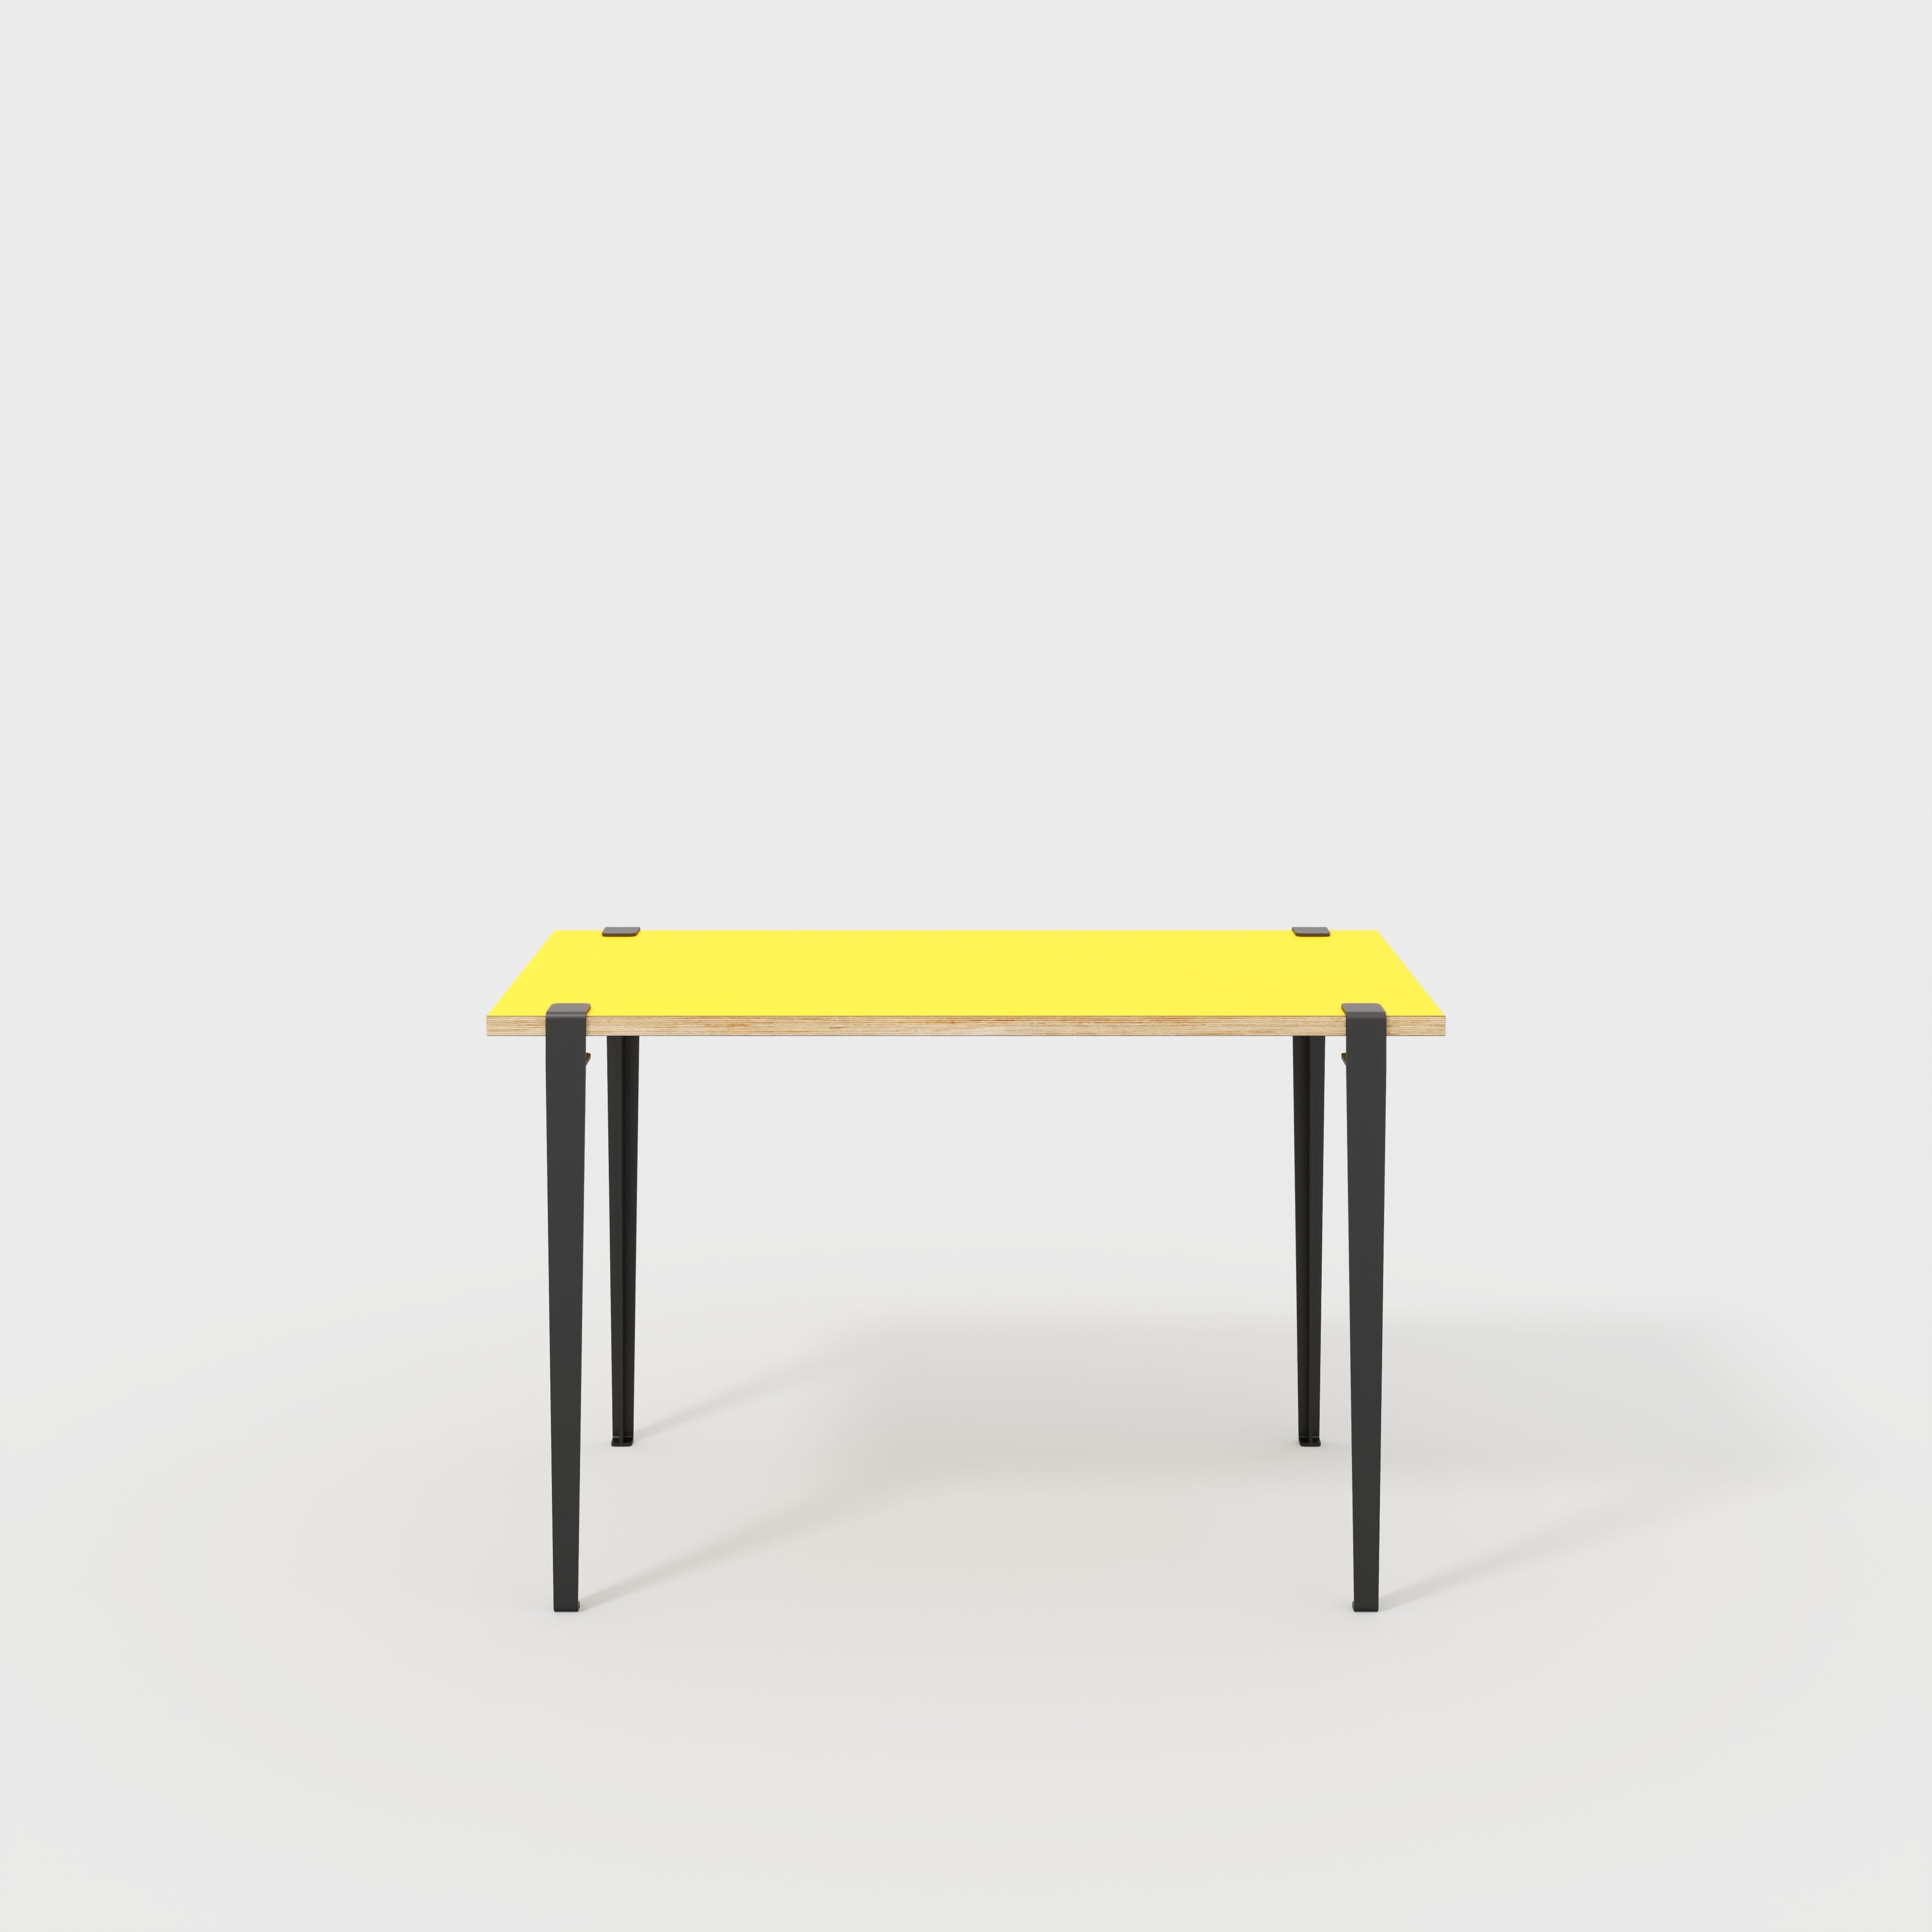 Desk with Black Tiptoe Legs - Formica Chrome Yellow - 1200(w) x 600(d) x 750(h)